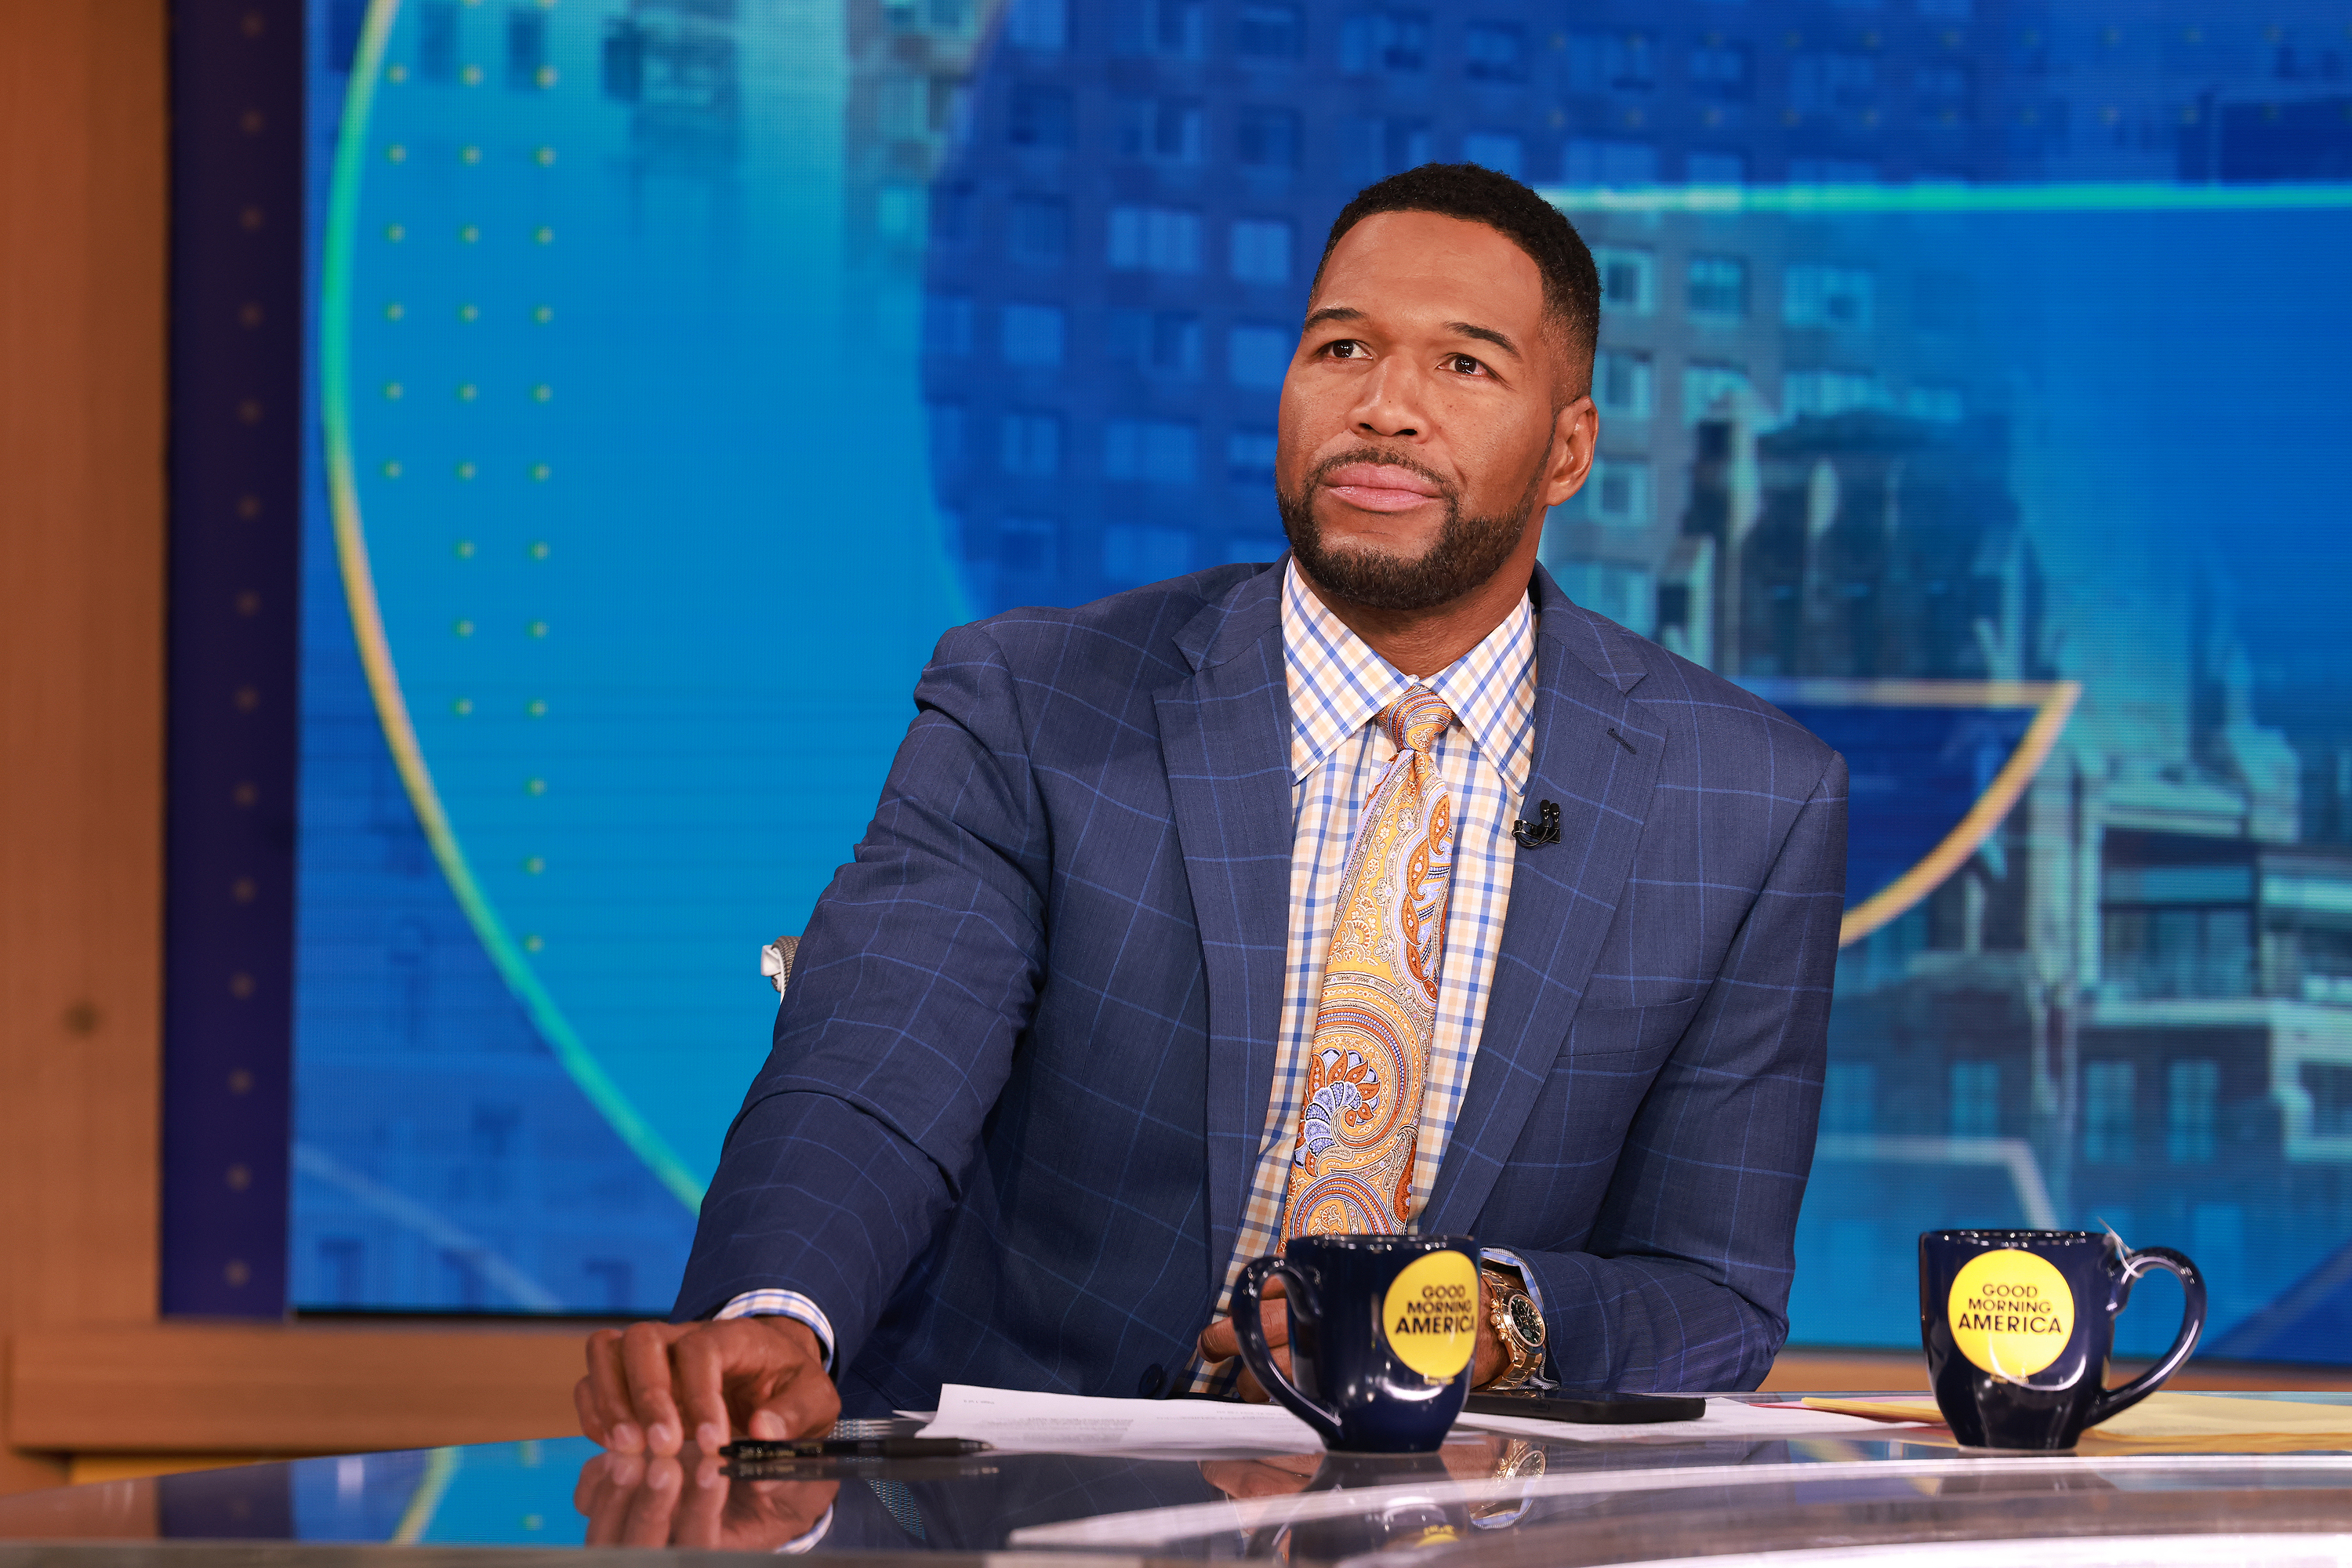 Michael Strahan has been absent from the set of Good Morning America